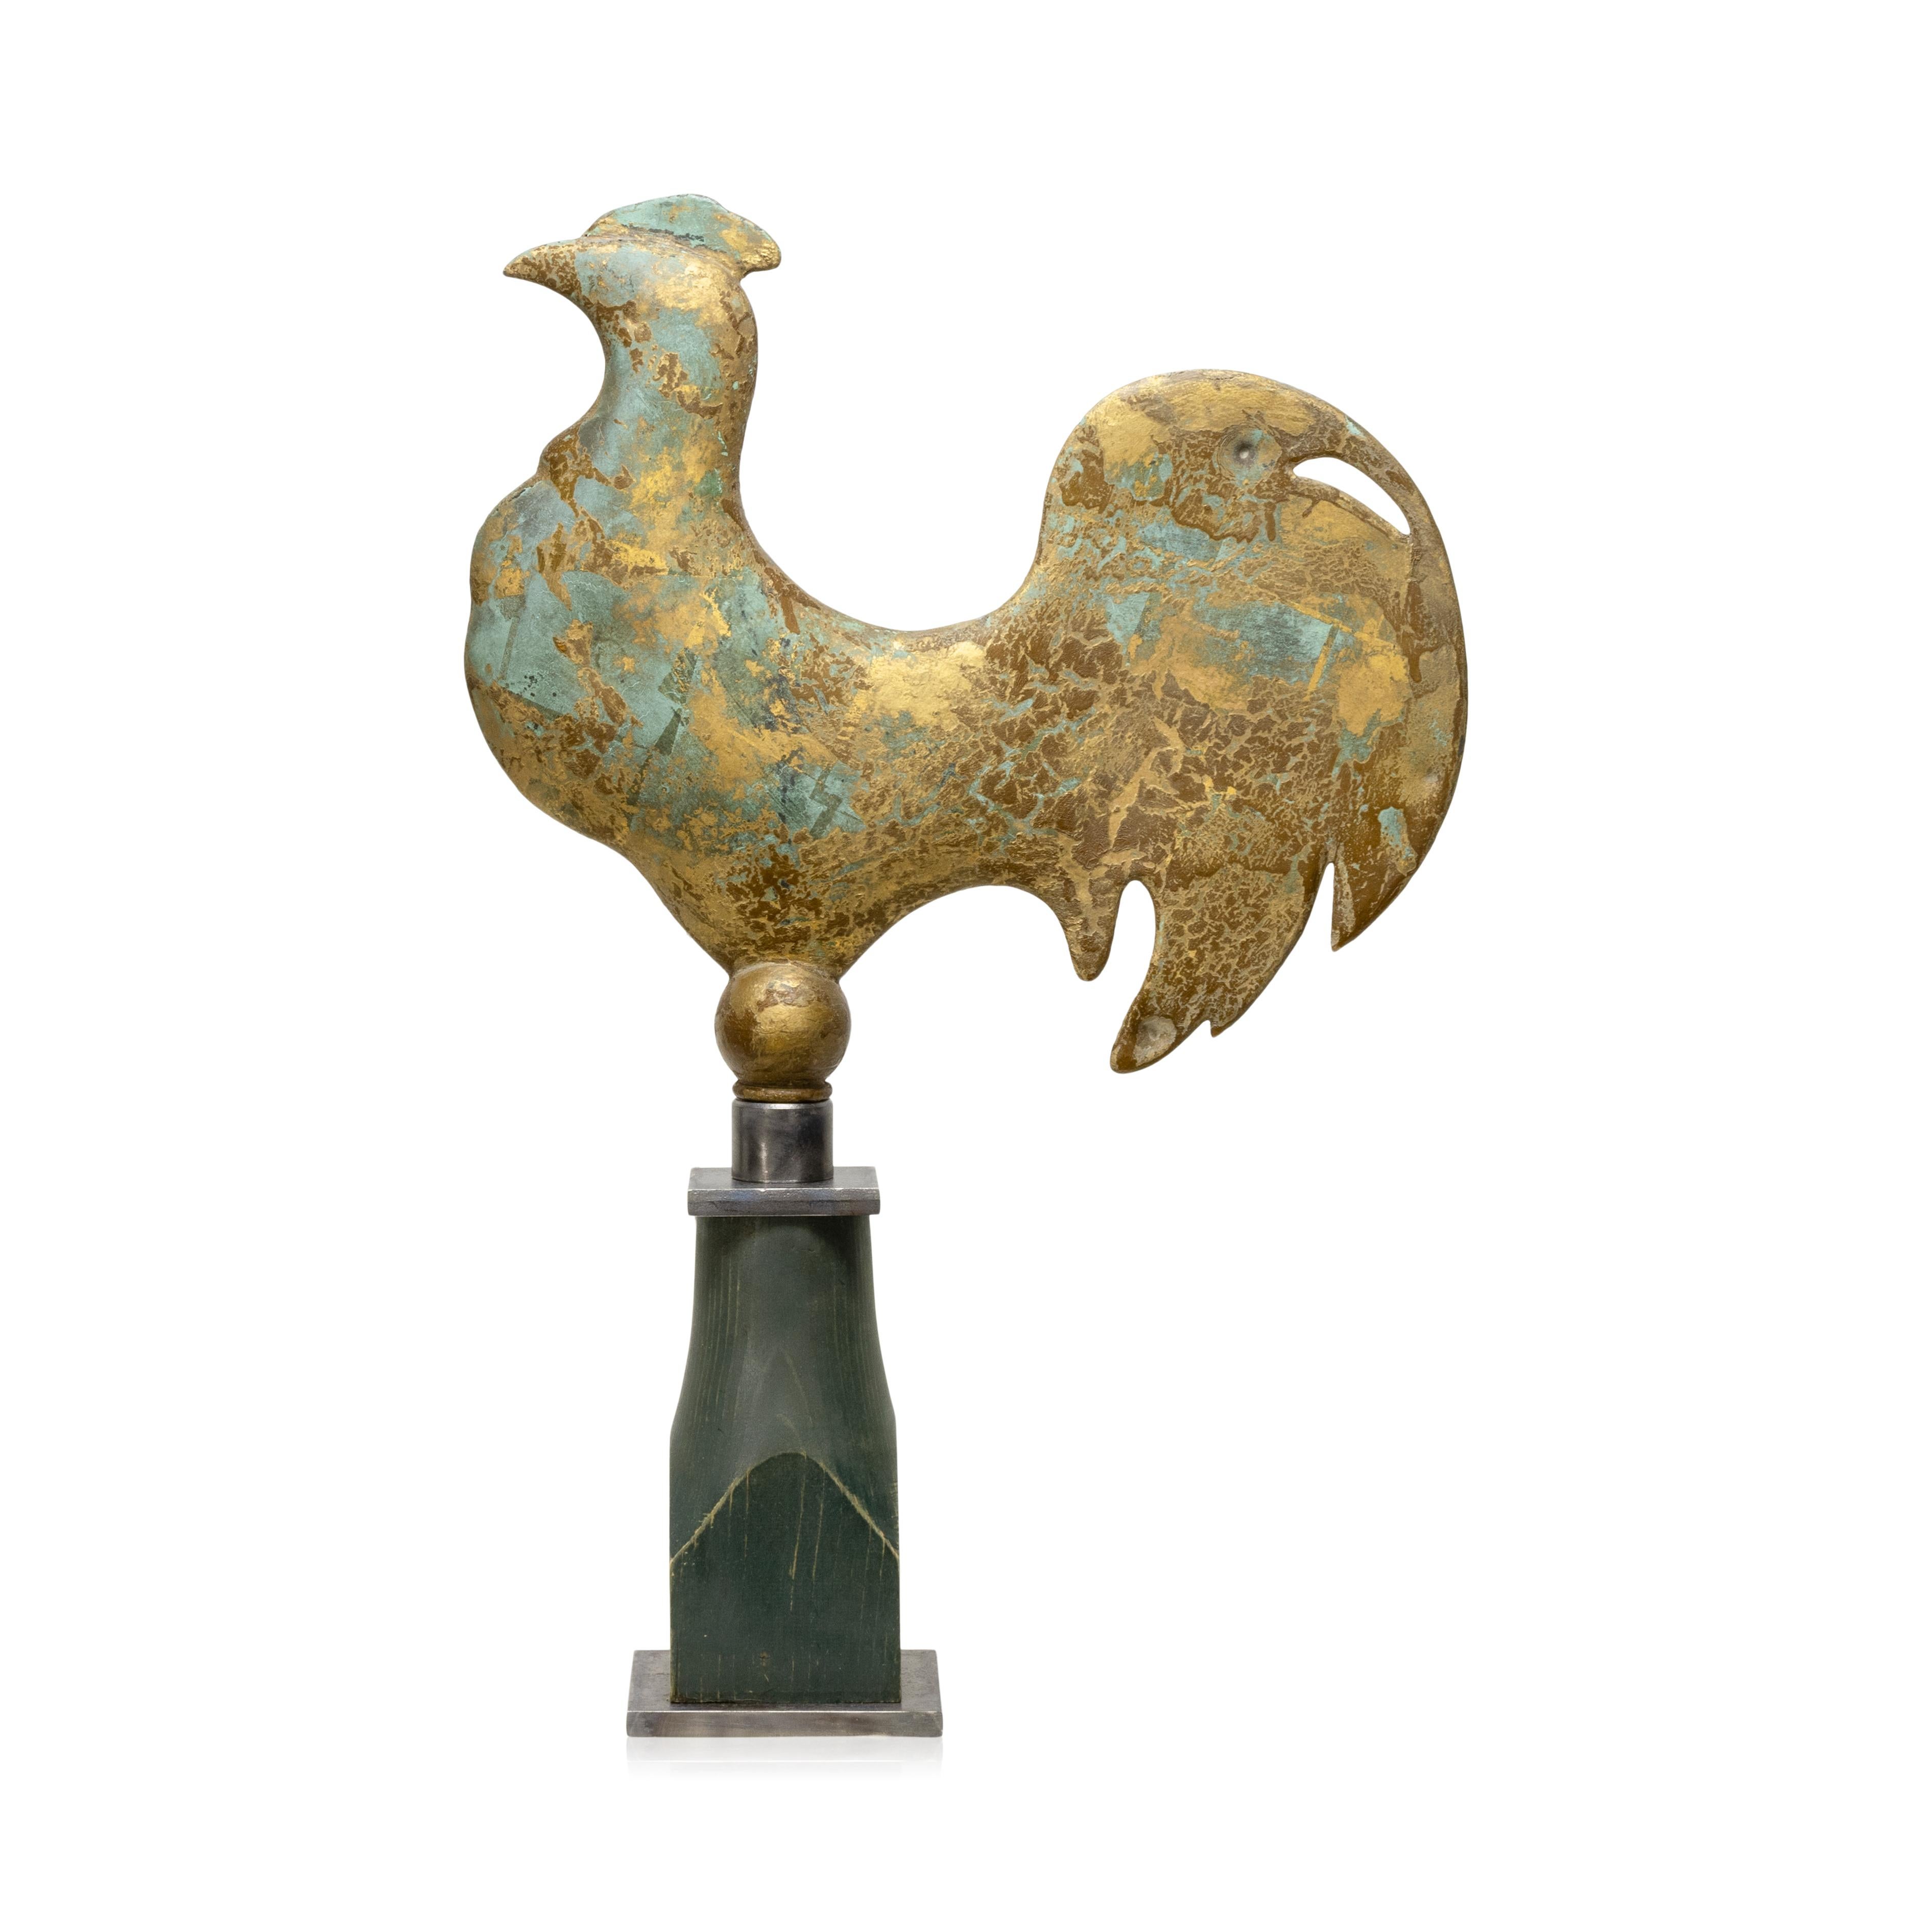 19th Century American cast copper full bodied rooster weather vane attributed to Vermont. Green verdigris, patination, traces of old paint and some gilt. This weather vane originally sat atop a building in Vergennes, Vermont. Ex. American Folk Art